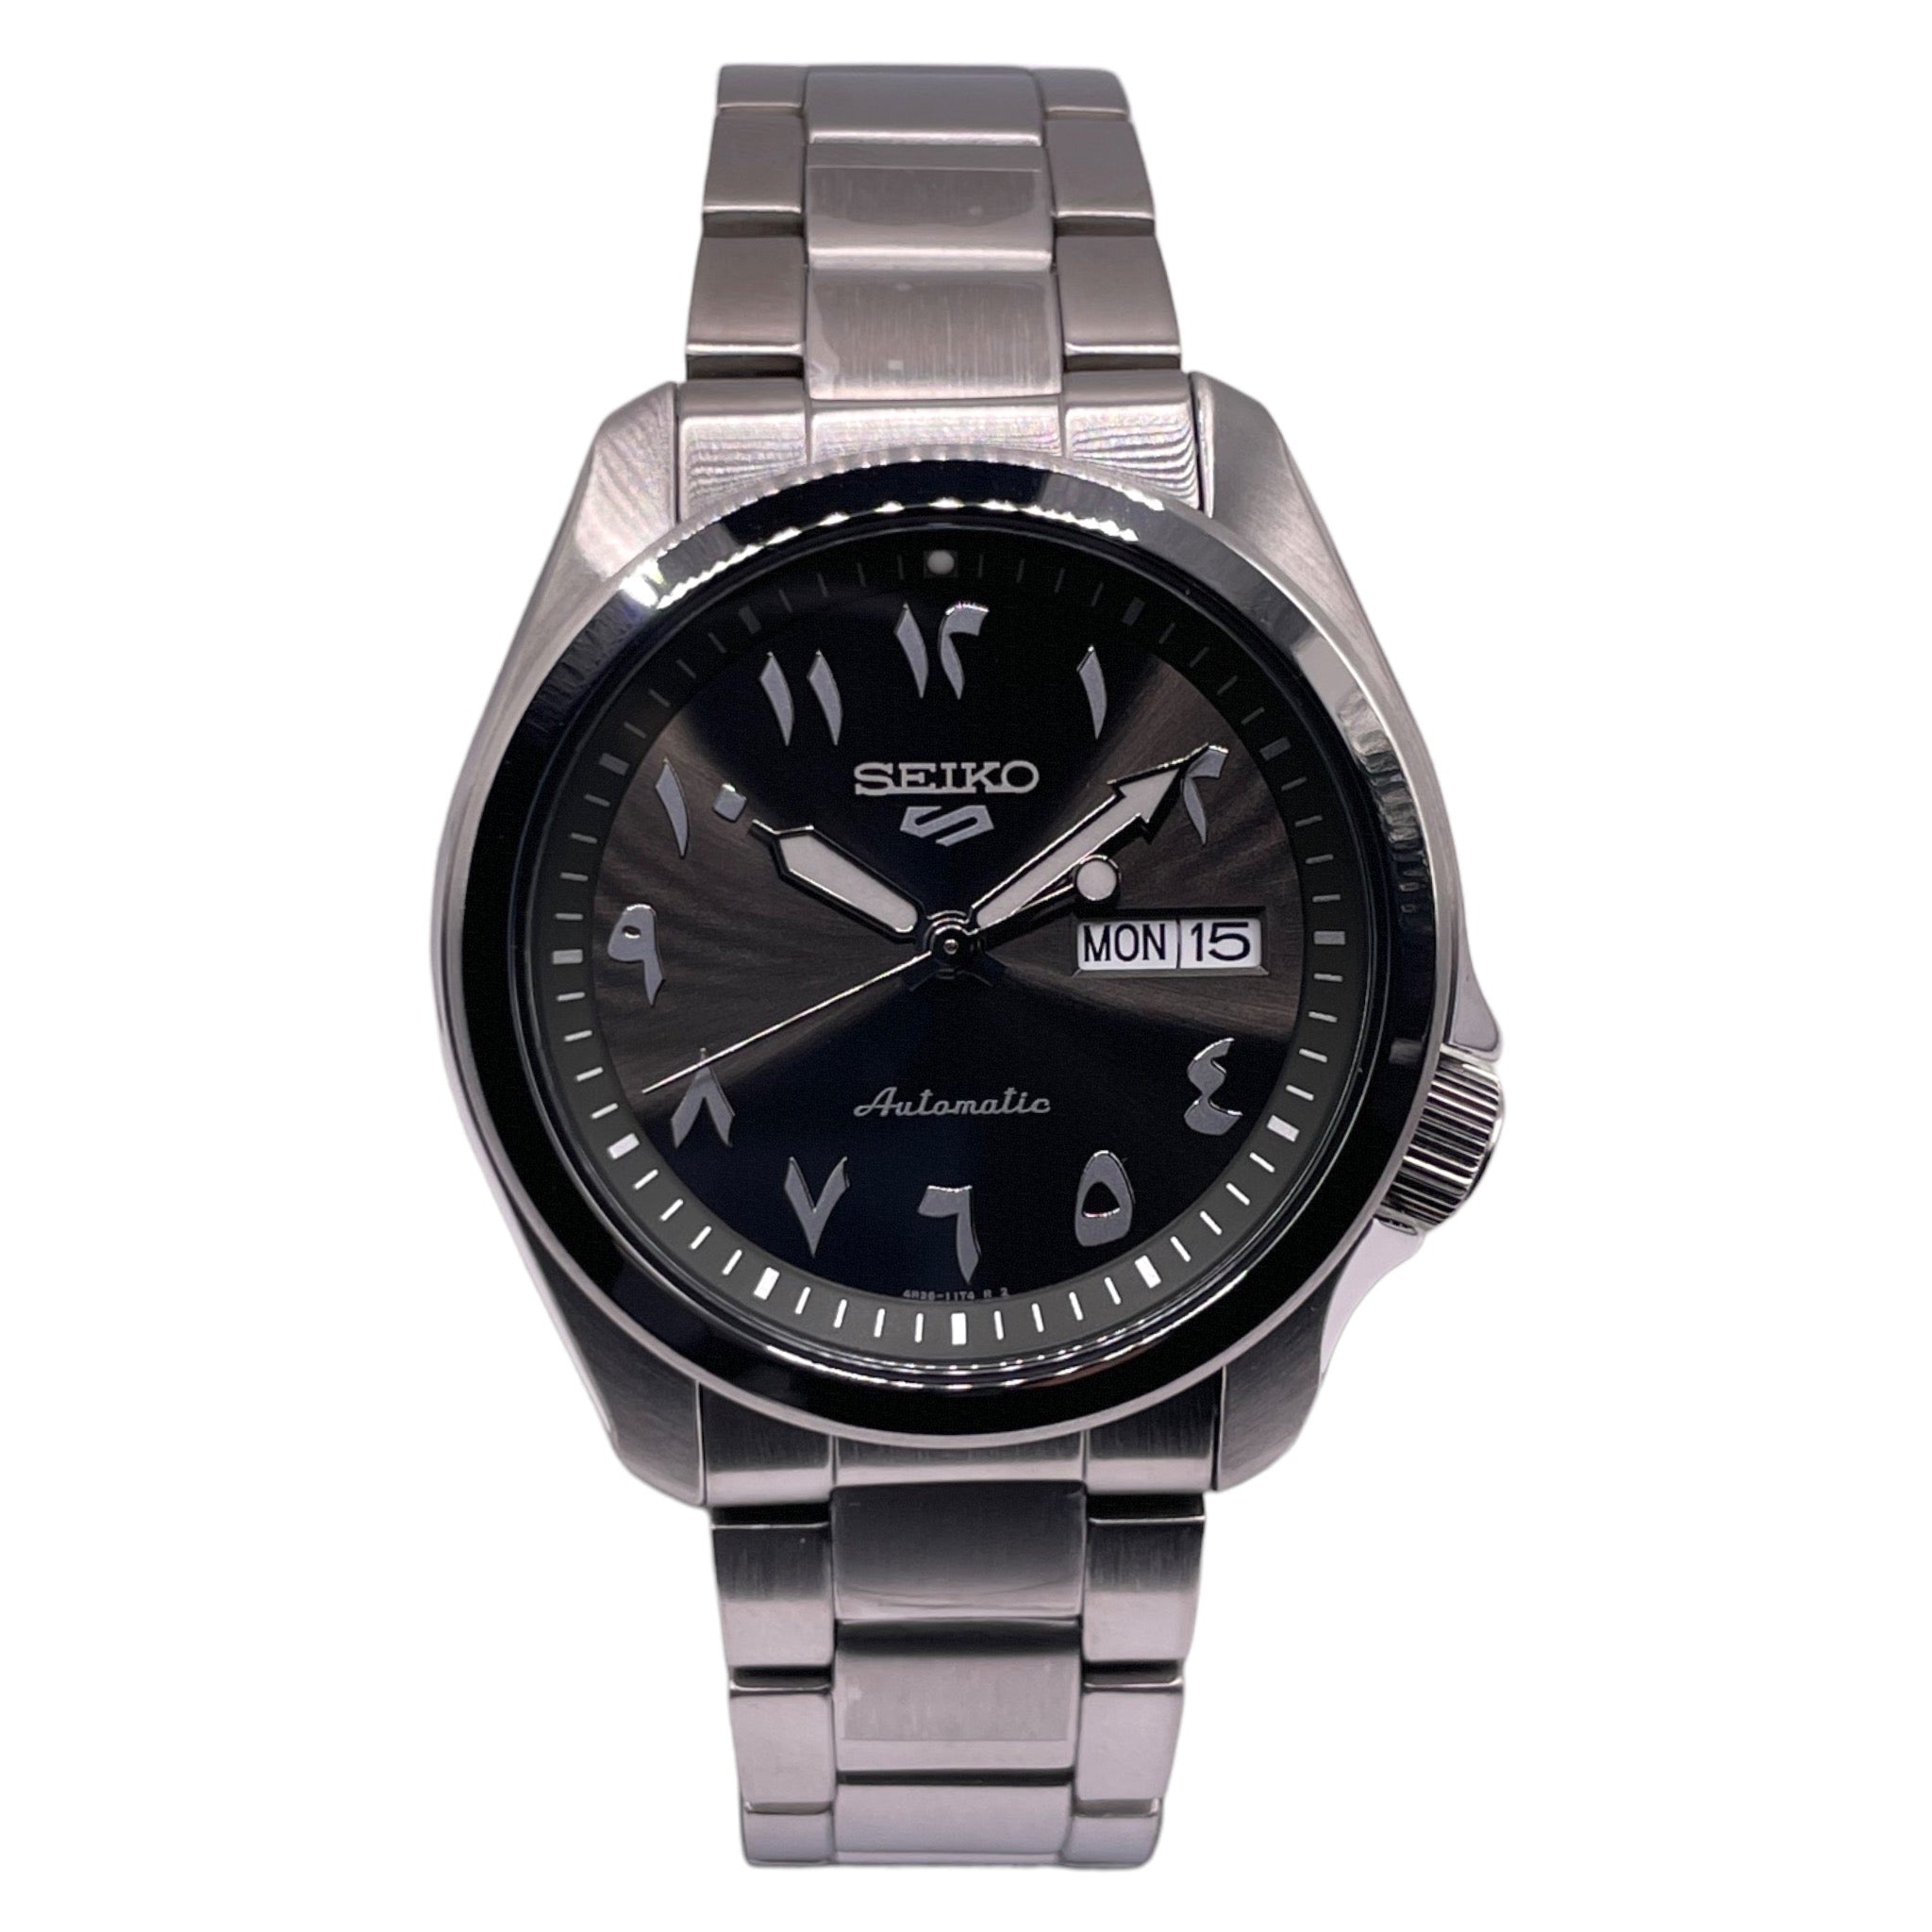 Buy Seiko Analog Black Dial Men's Watch-SRPD57K1 Stainless Steel, Silver  Strap at Amazon.in